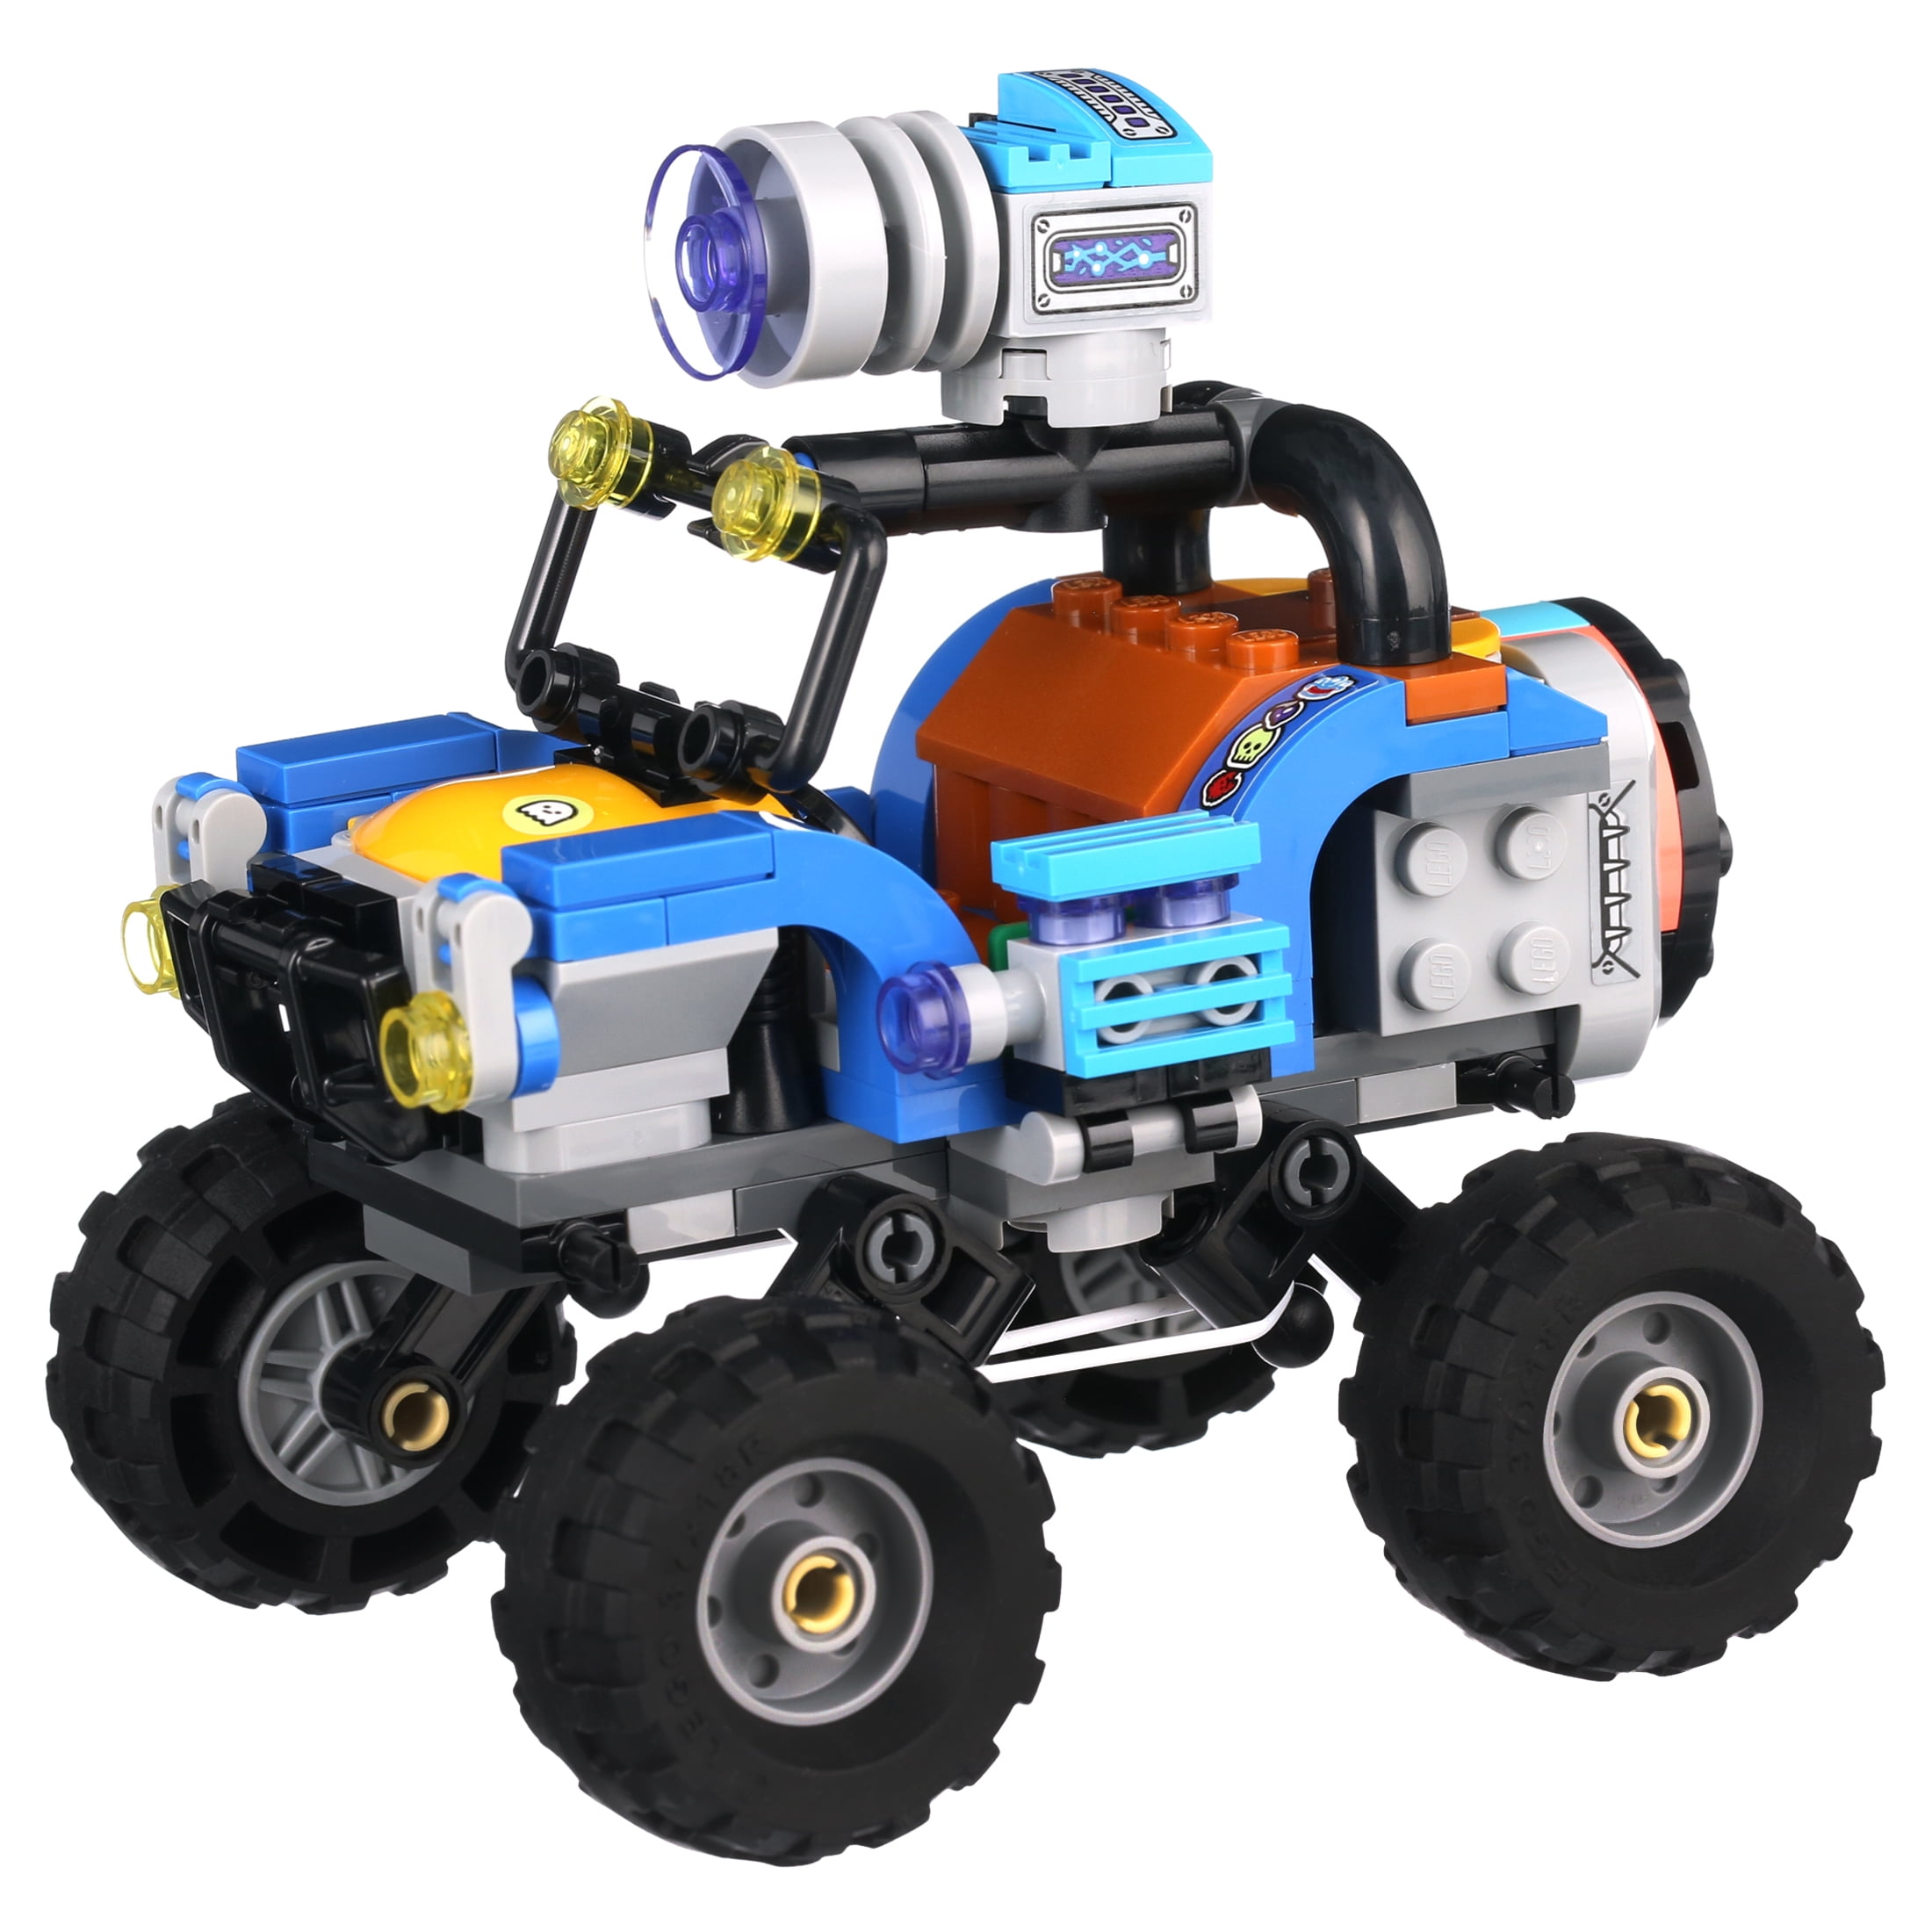 AR LEGO Hidden Side Jacks Beach Buggy 70428 Popular Ghost Toy 170 Pieces Cool Augmented Reality New 2020 Play Experience for Kids 